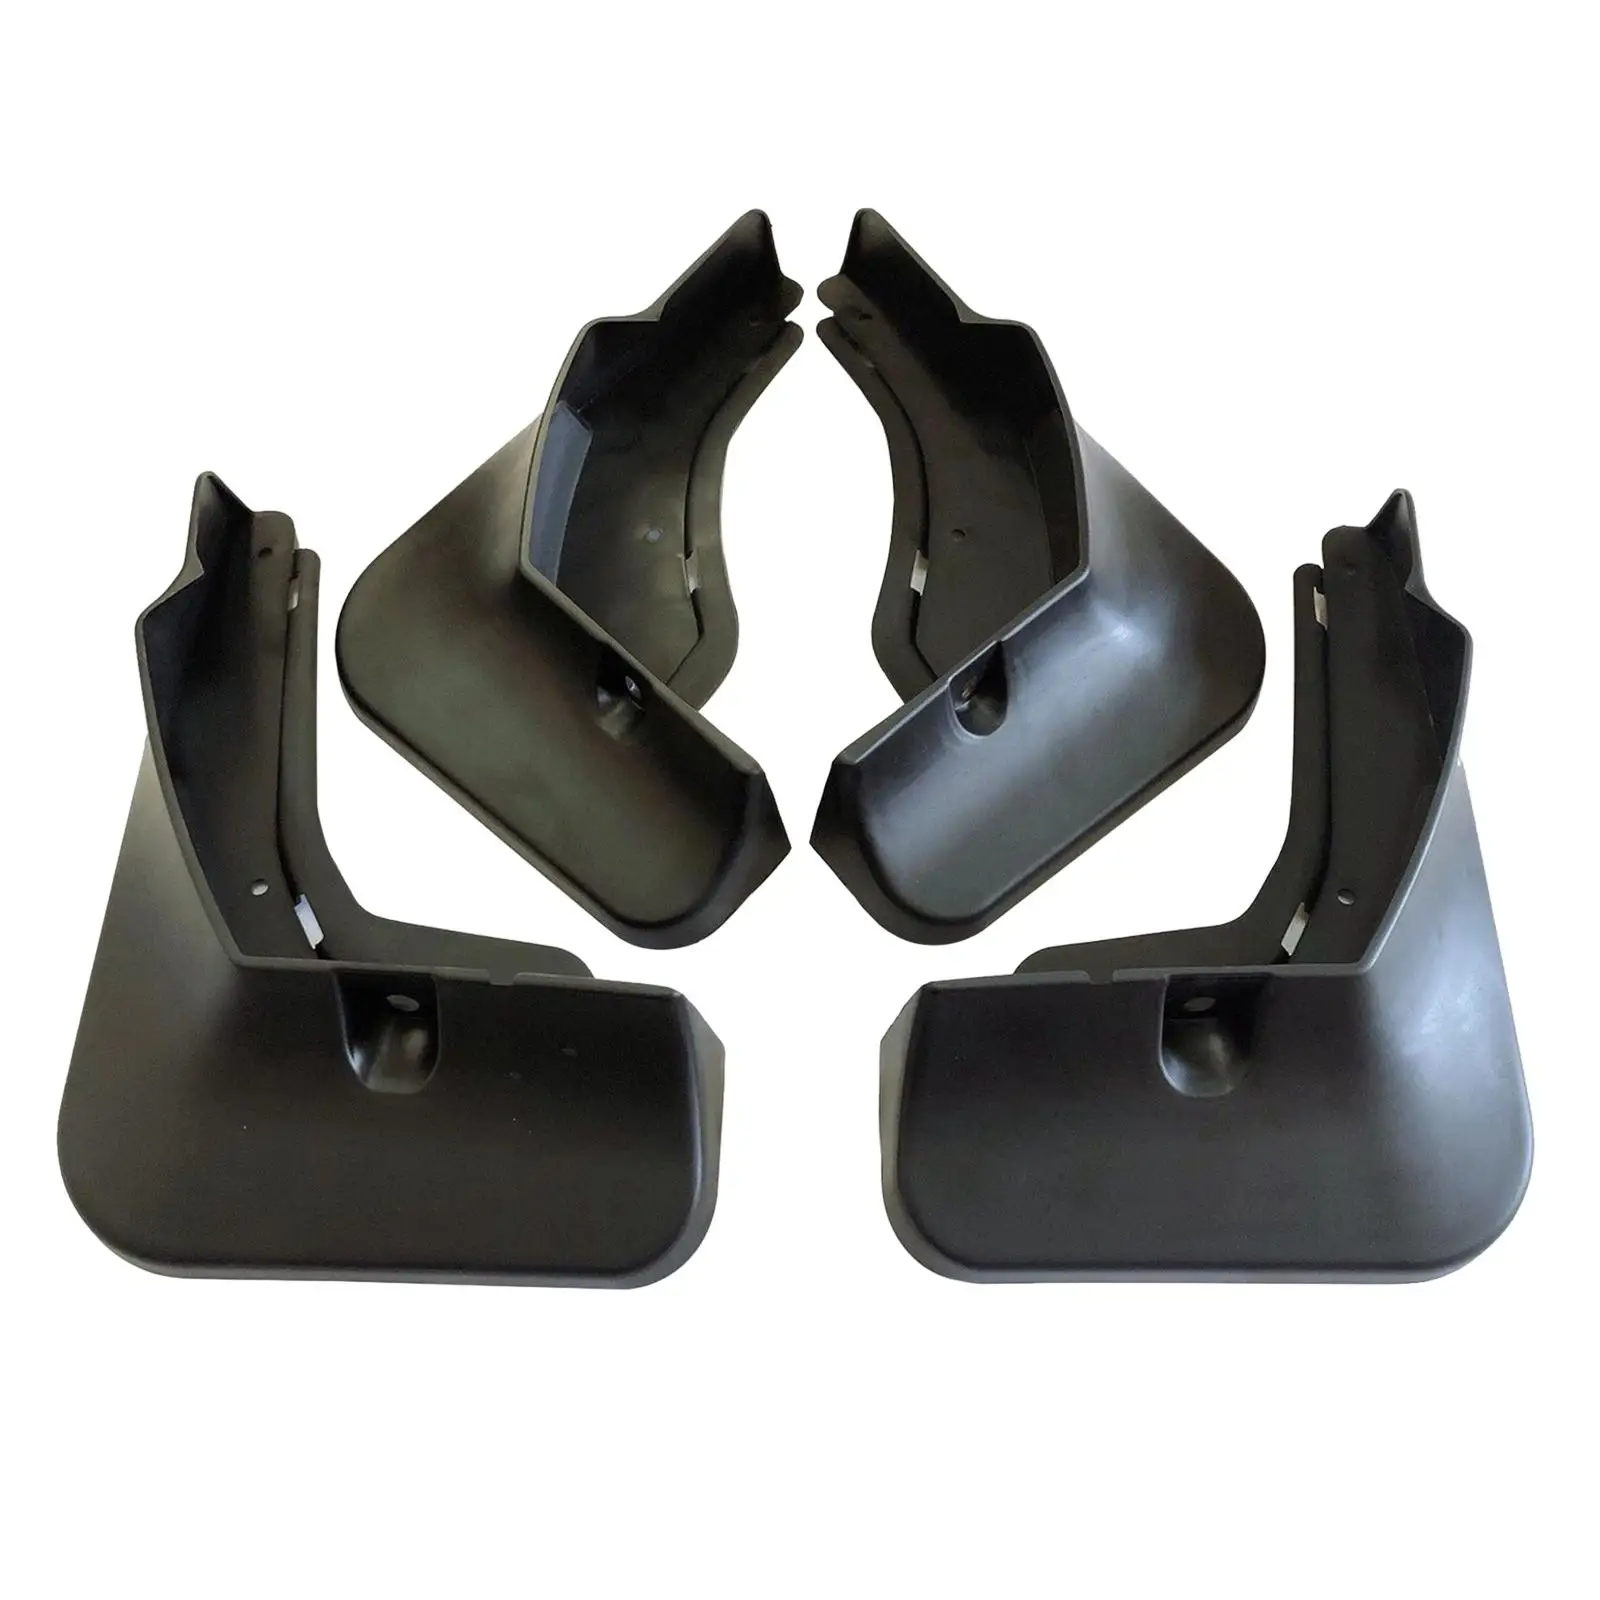 4x Car Mudguard Front Rear Easy to Install Accessories for Byd Song Plus Pro